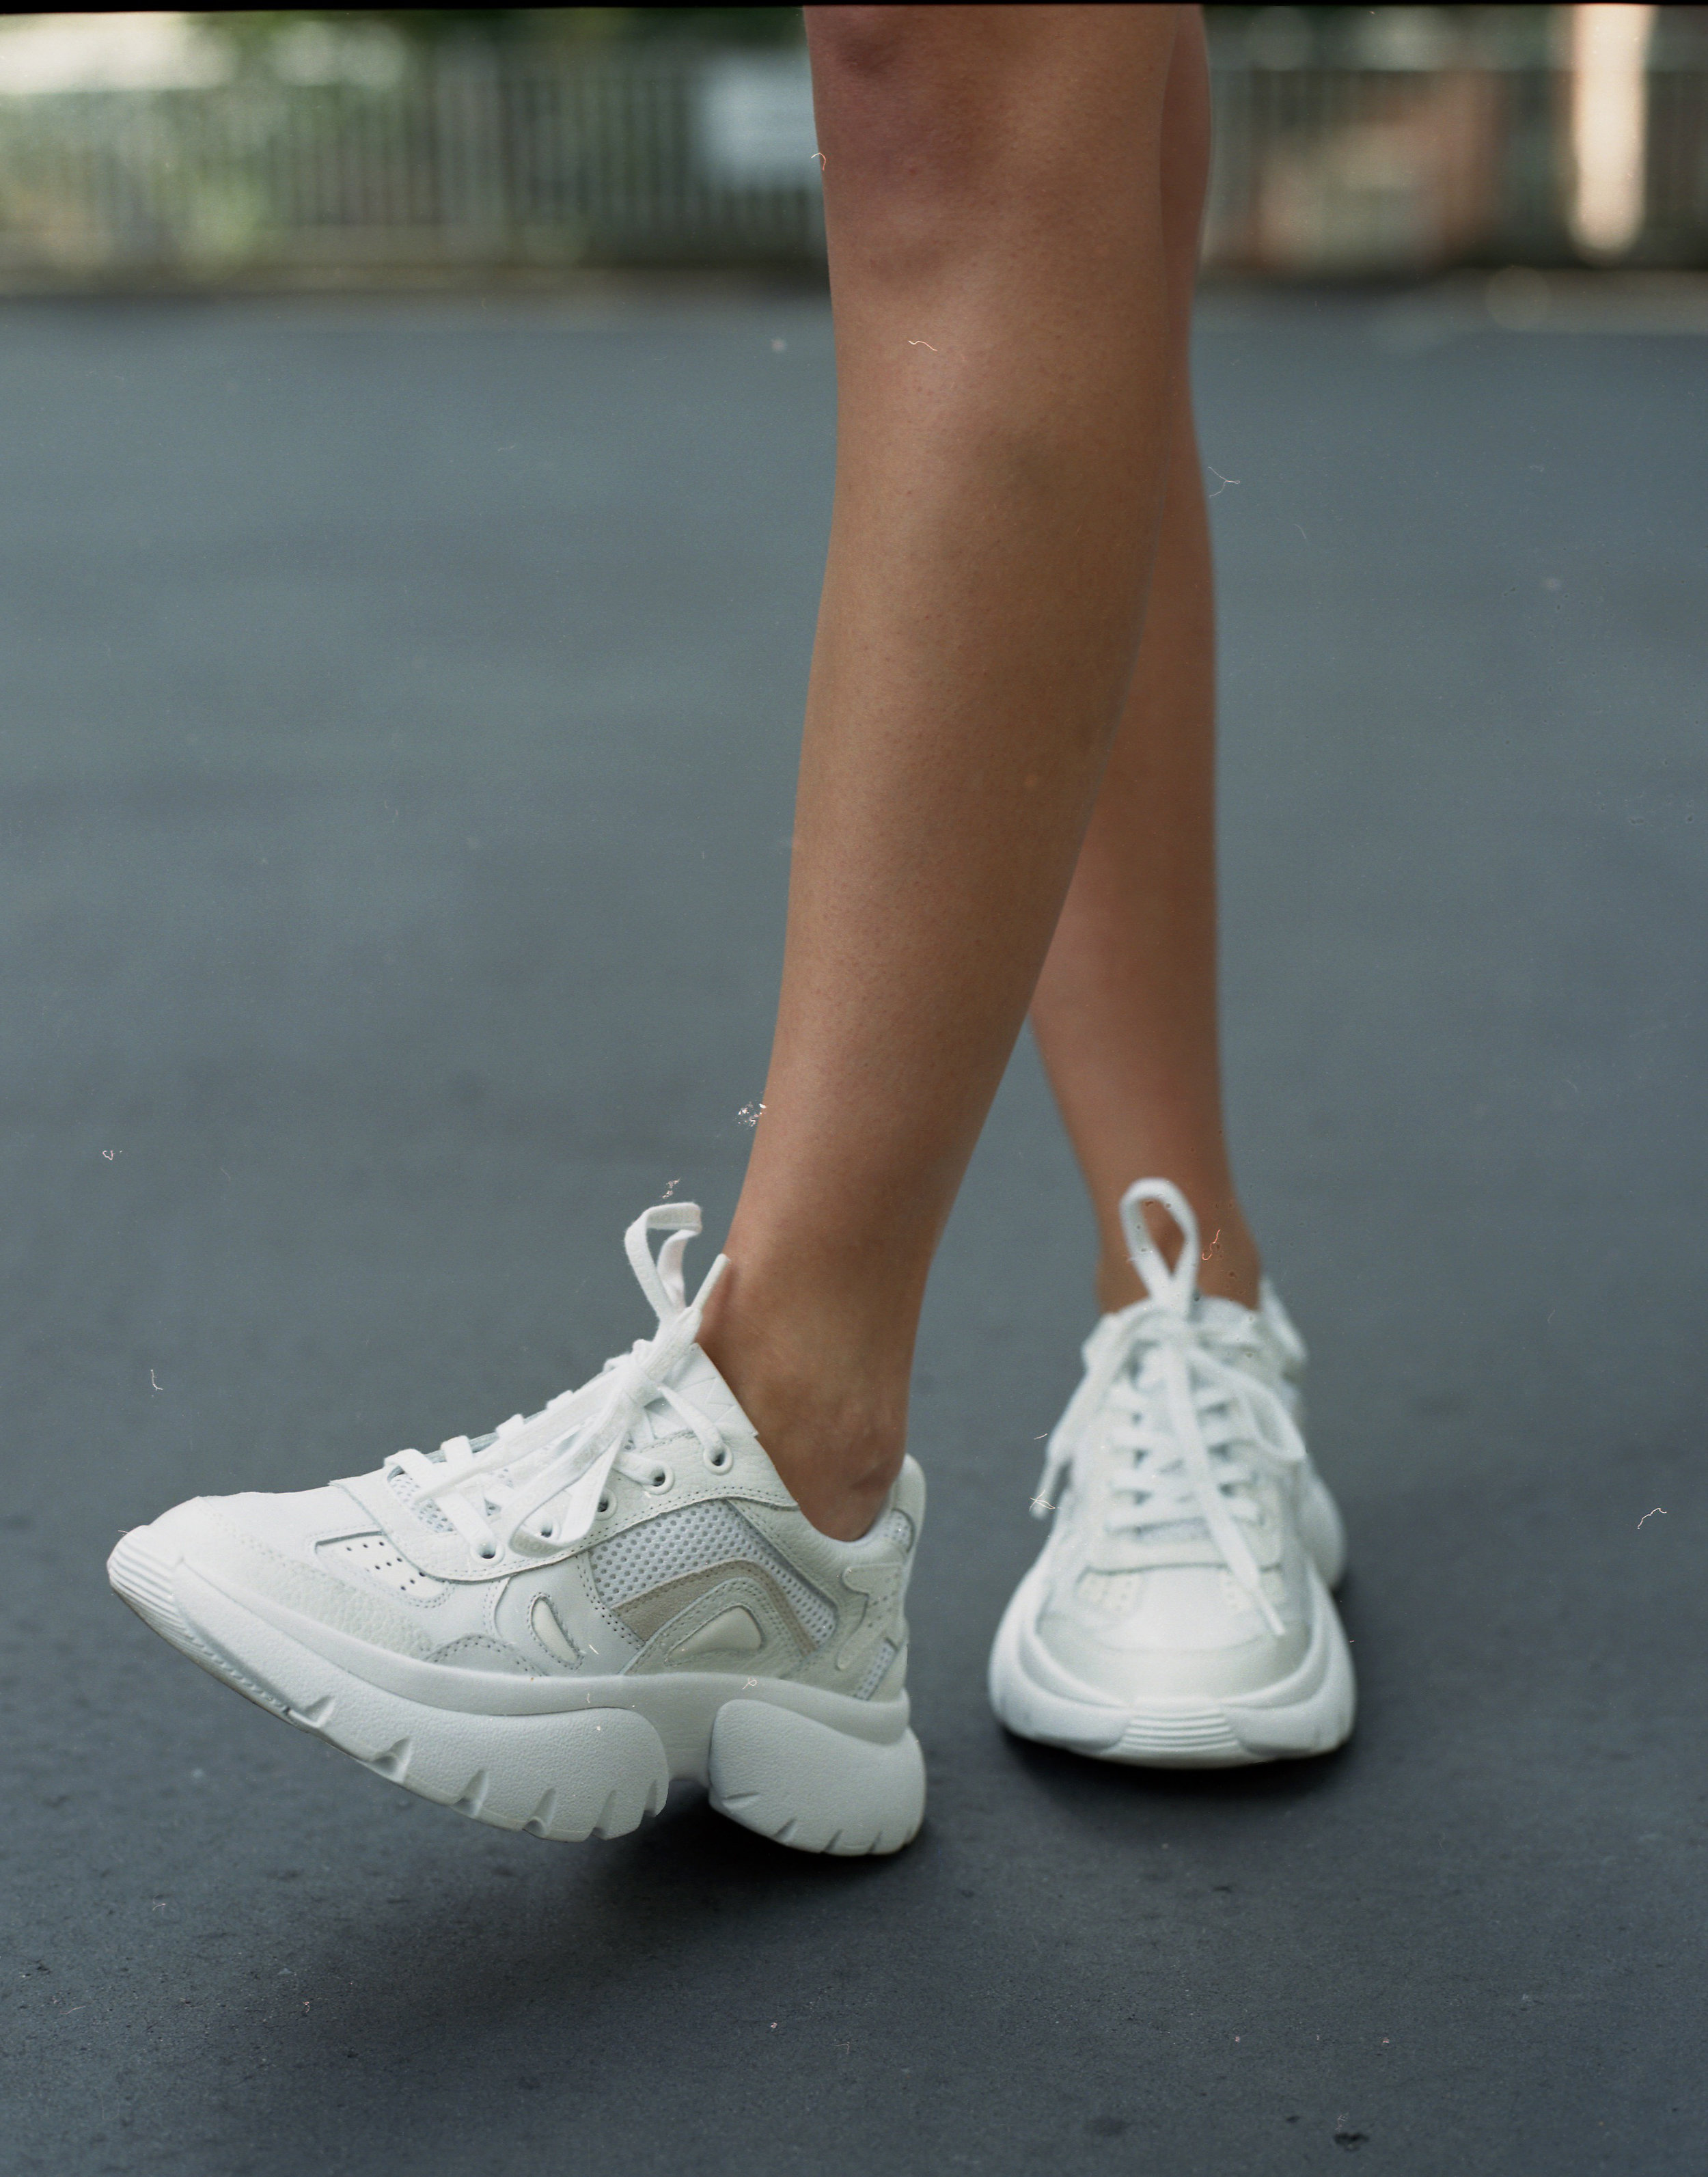 The Chunky Trainer — SHOT FROM THE STREET